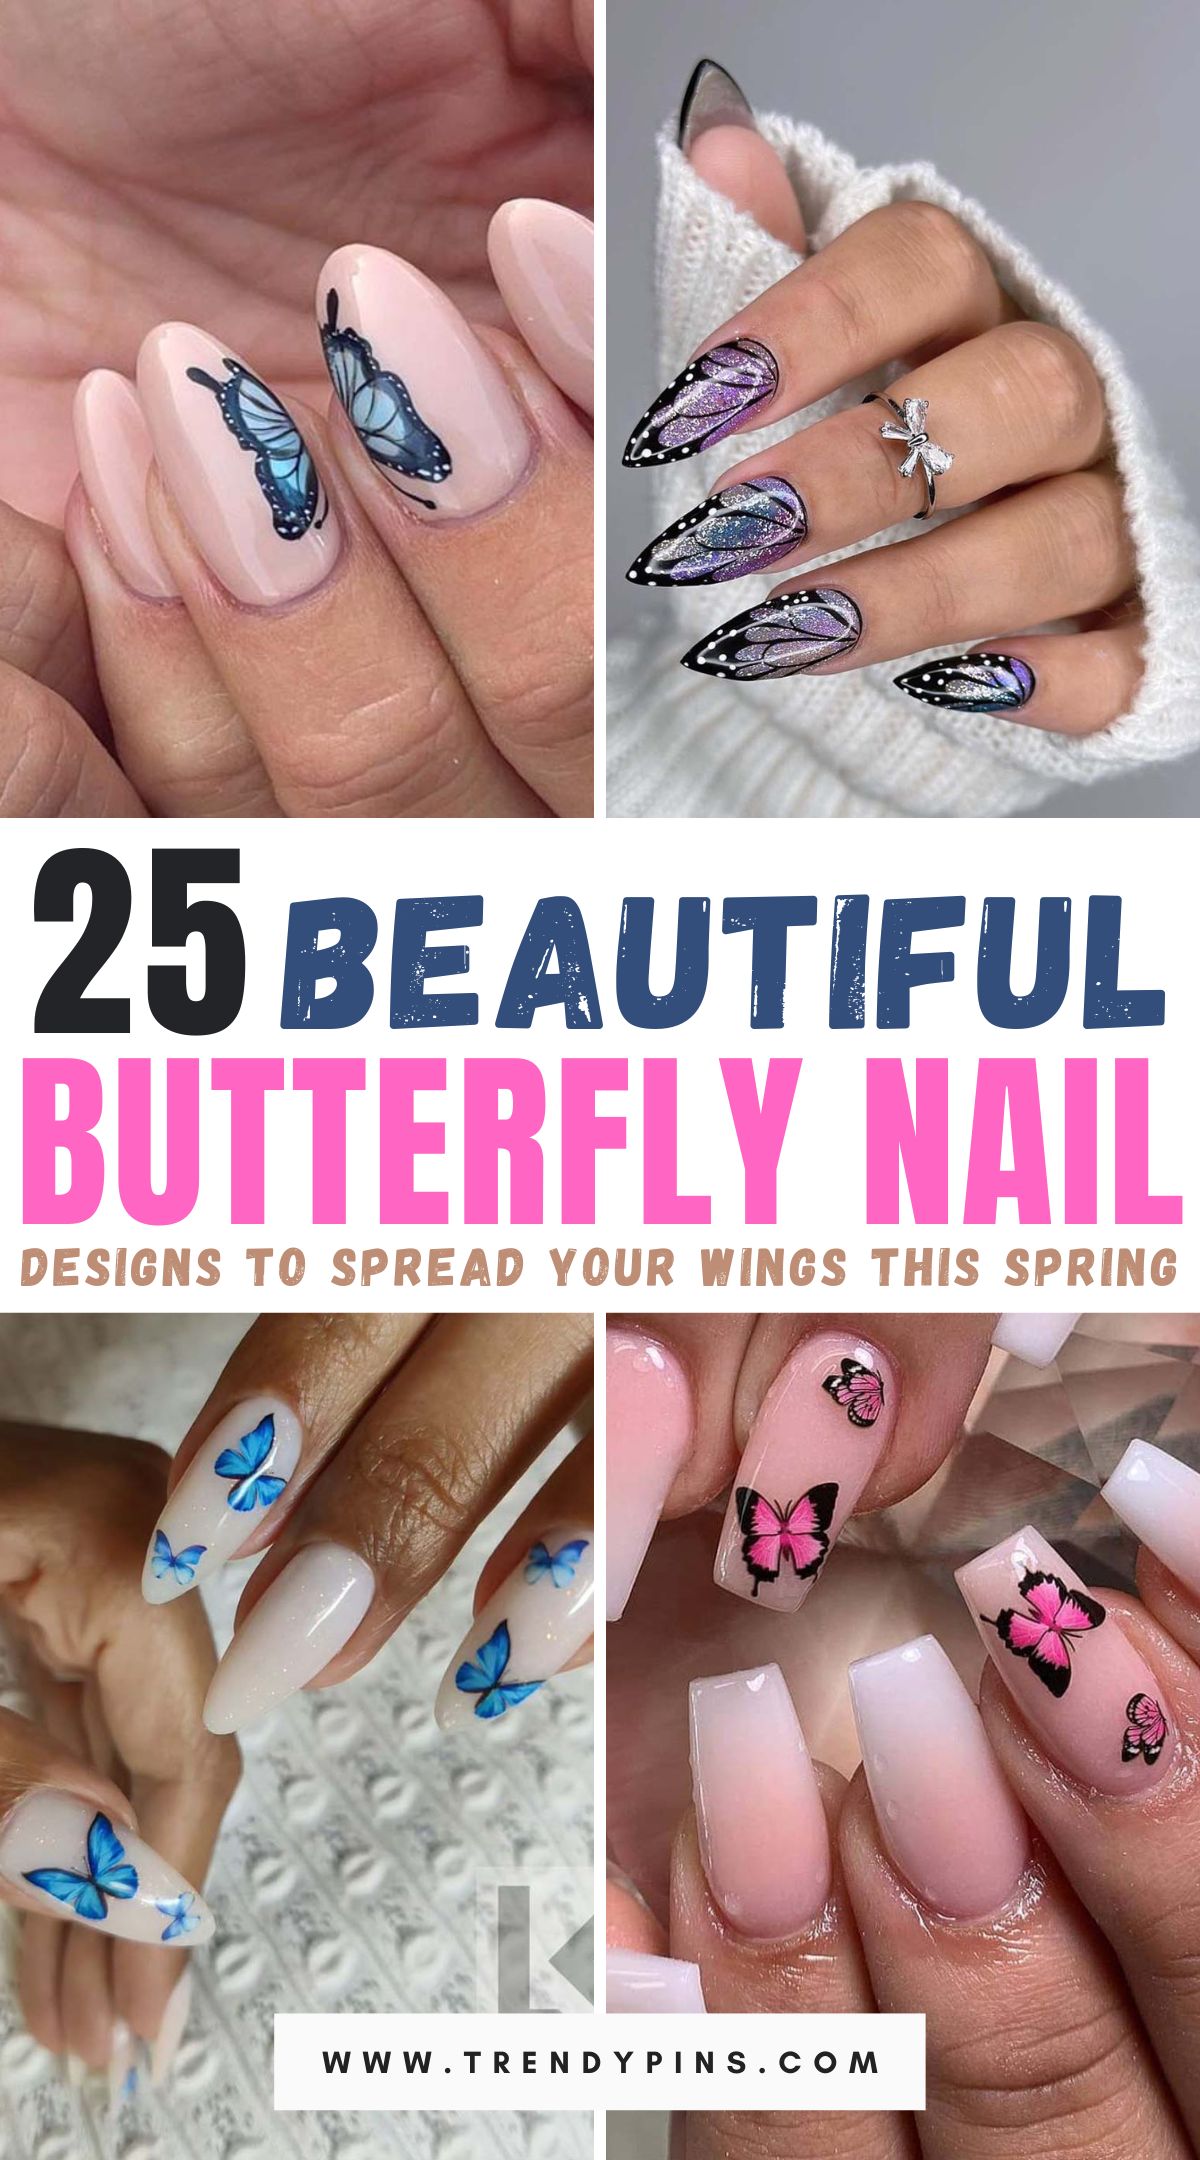 Embrace the freedom of spring with these 25 butterfly nail designs. From delicate accents to bold motifs, explore a variety of charming nail art ideas inspired by nature's fluttering beauties, perfect for welcoming the season with style.